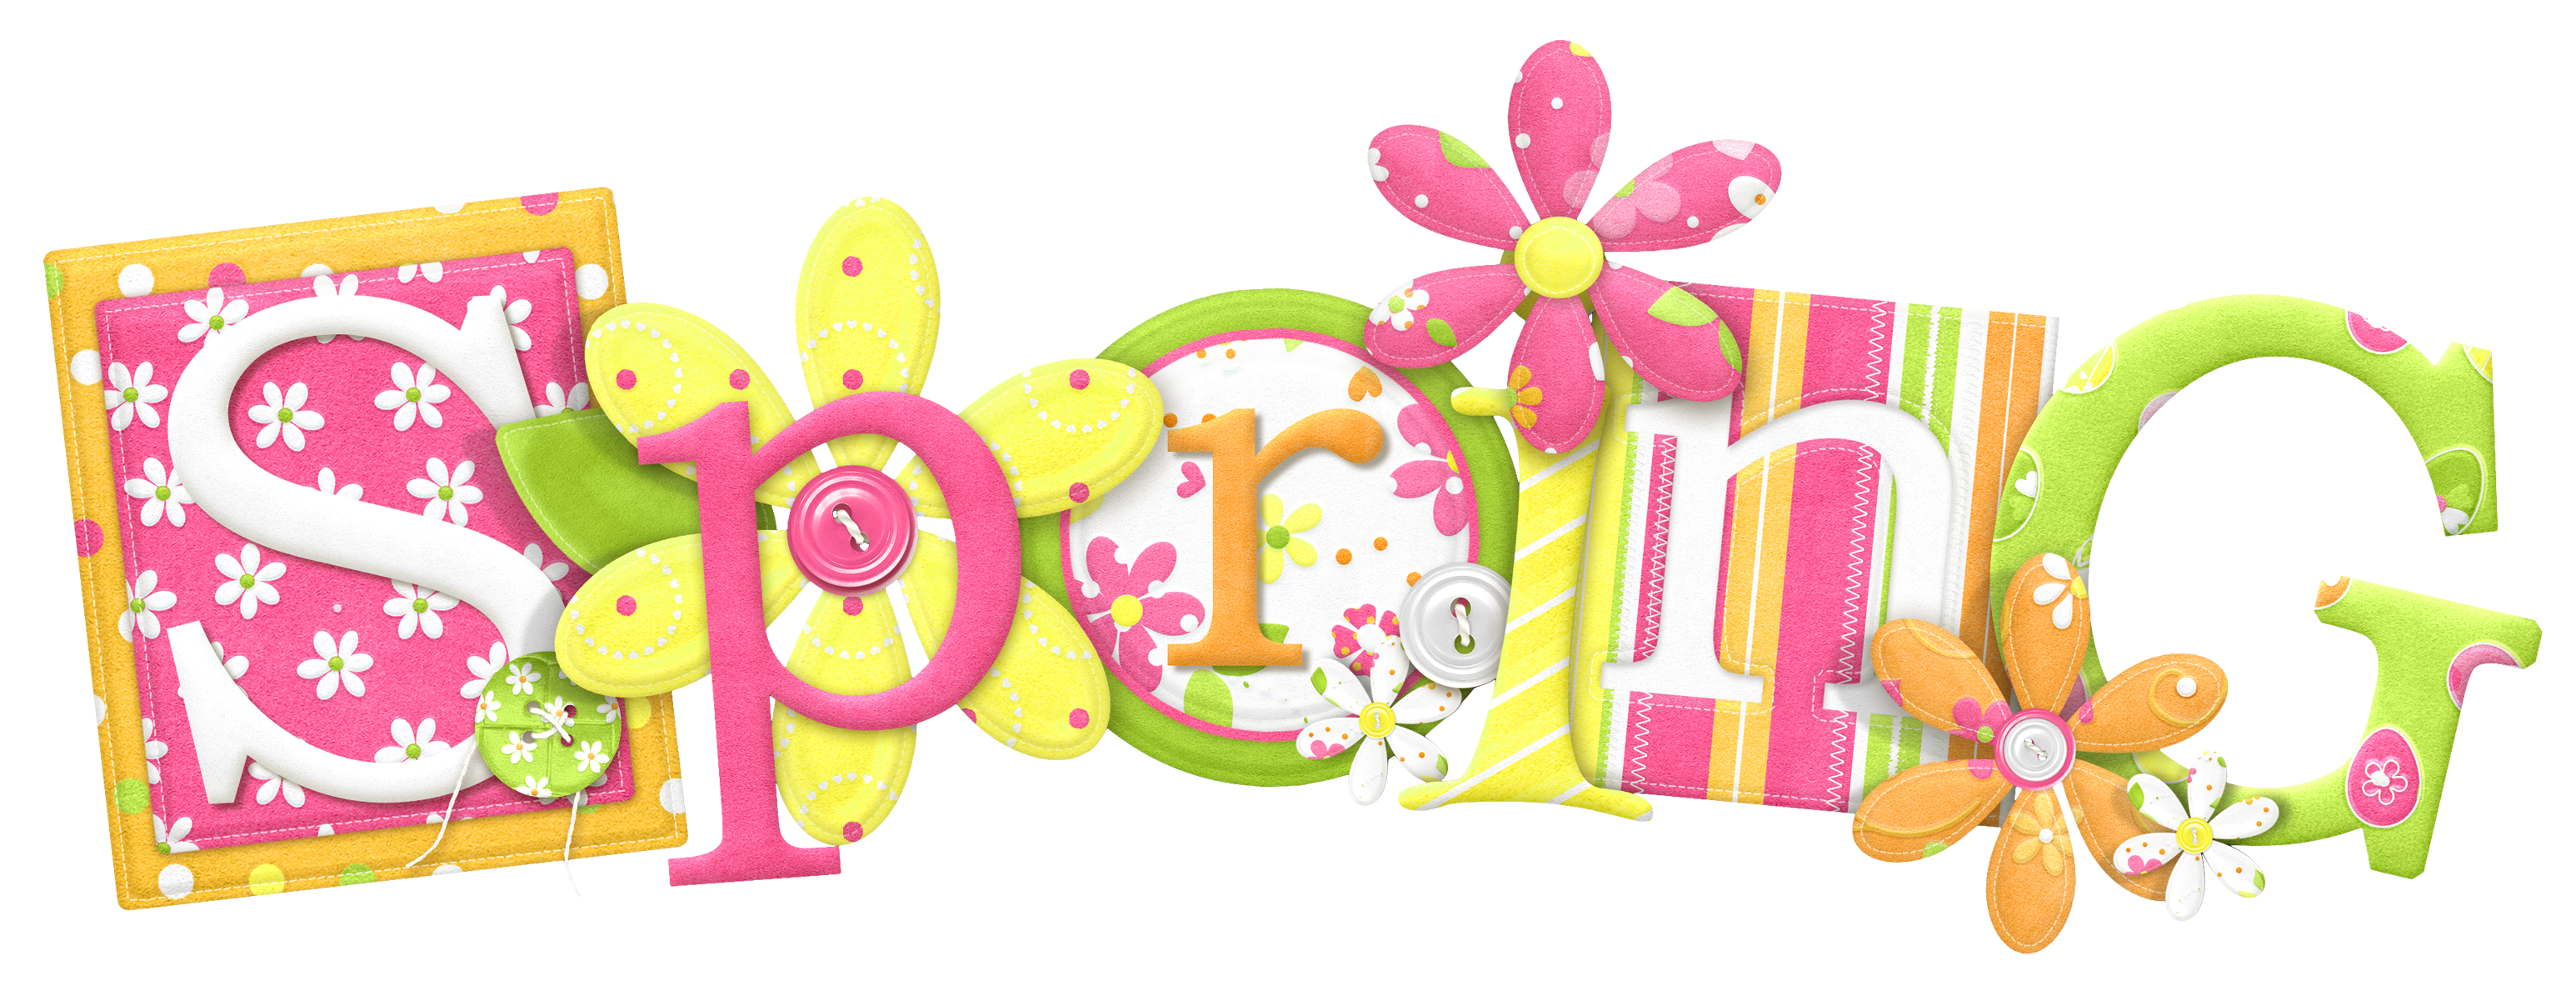 Spring clip art free clipart image 2